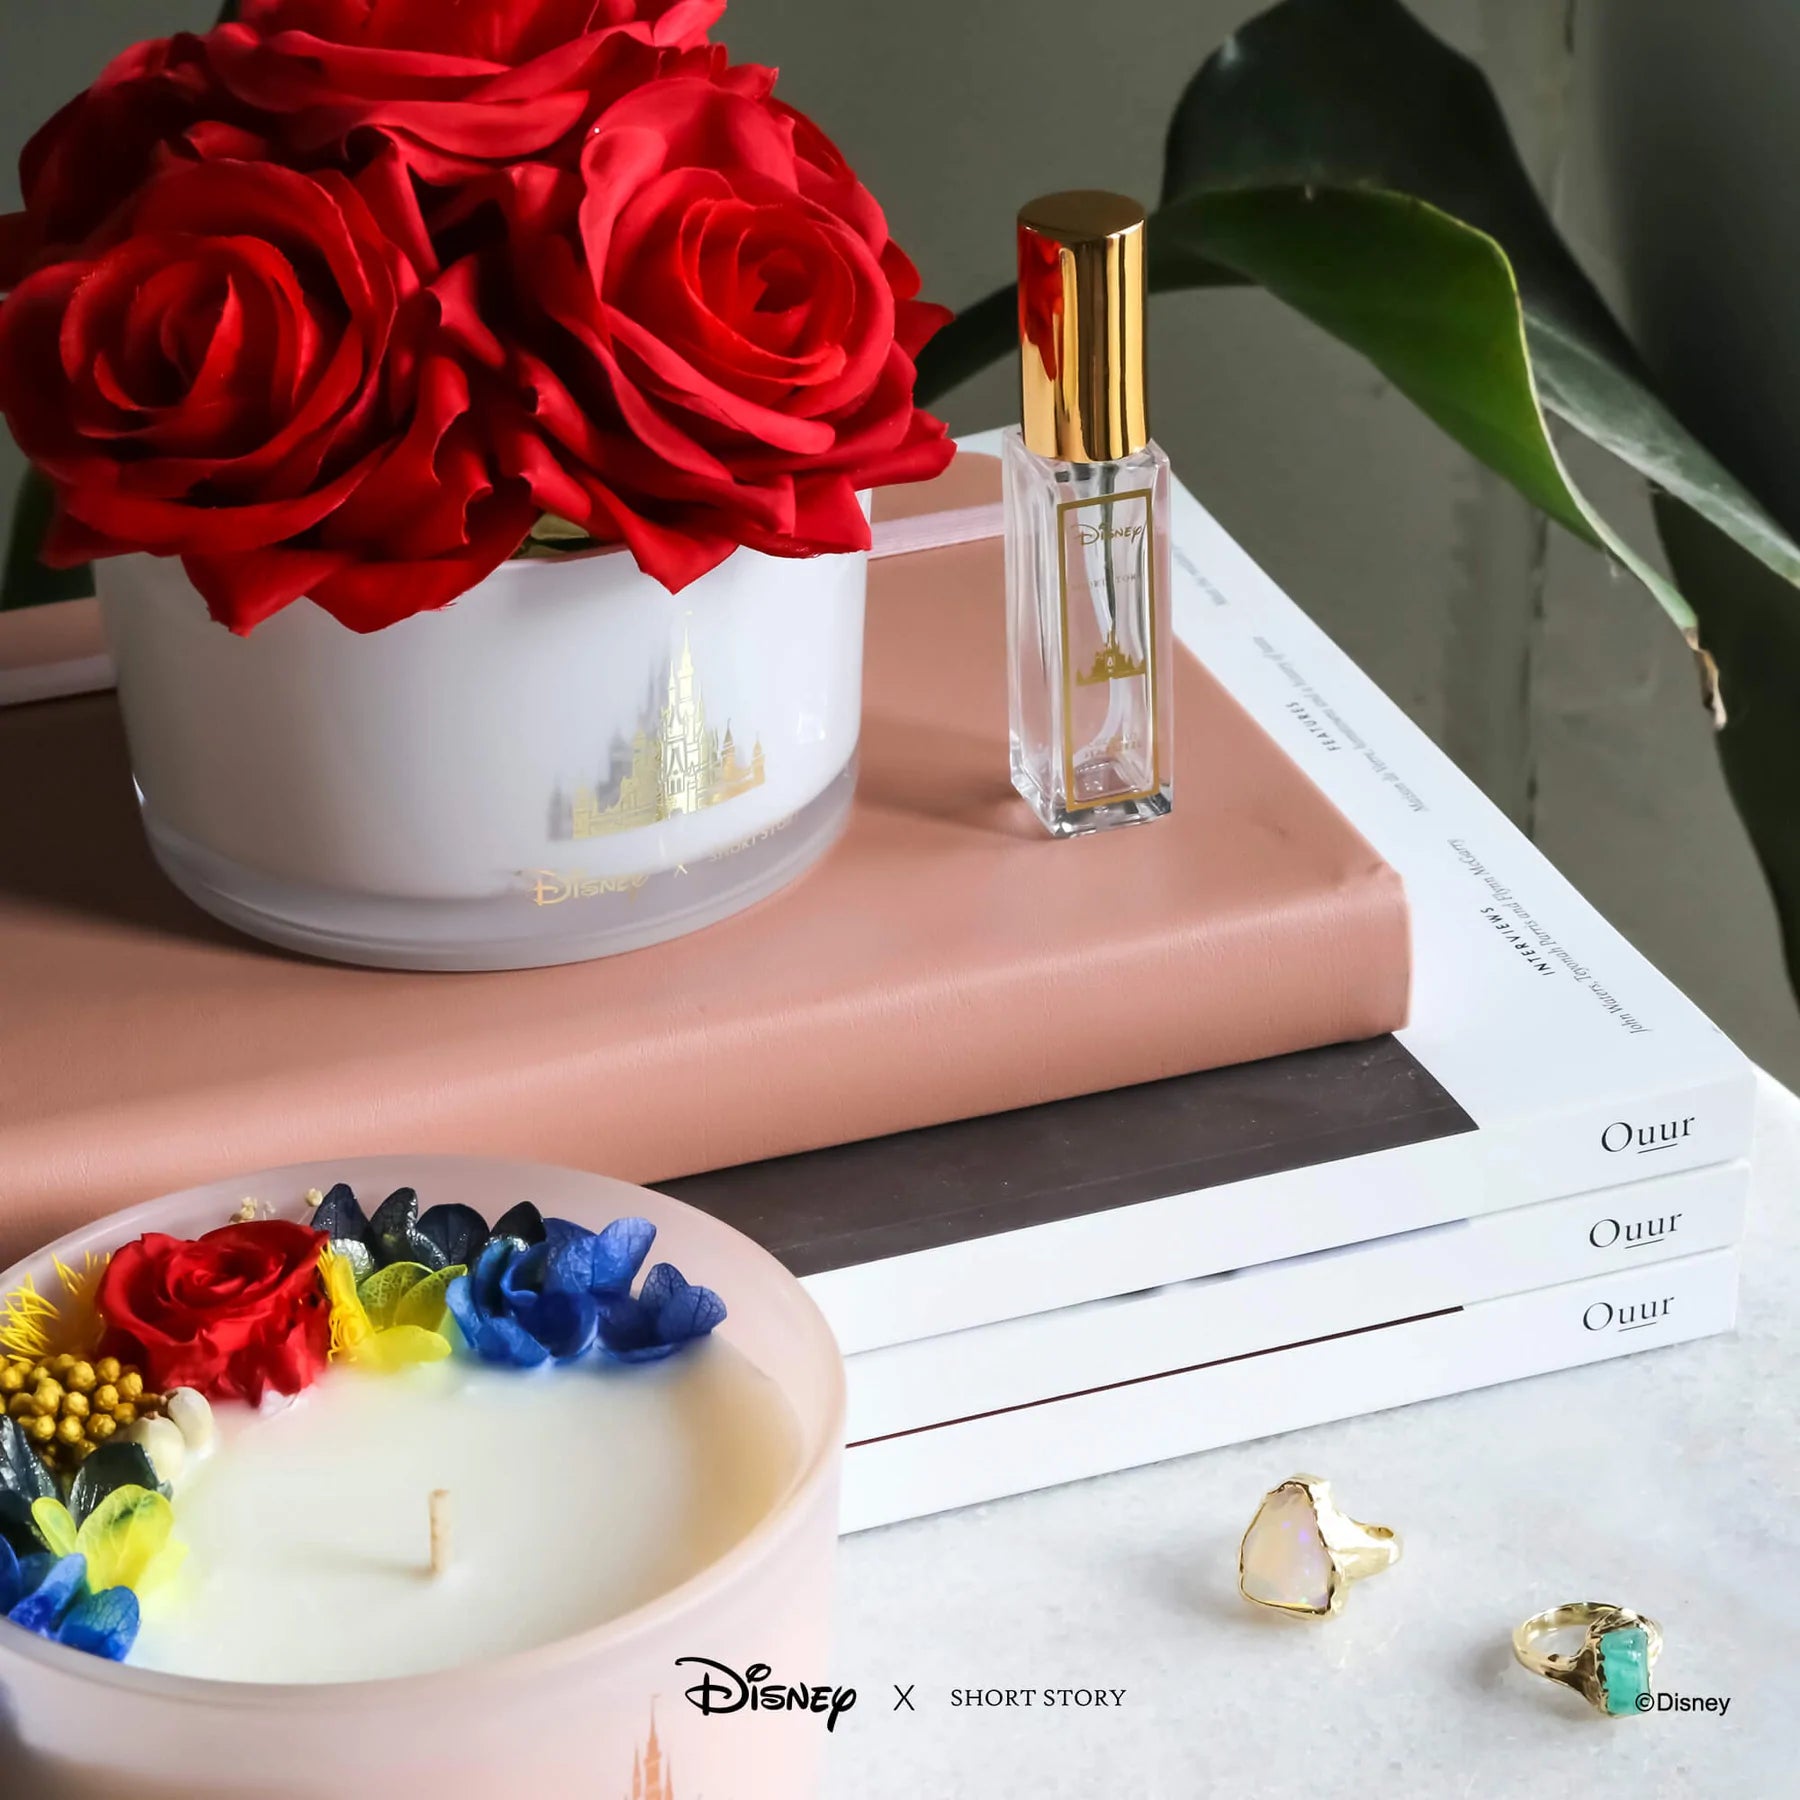 Short Story - Disney Diffuser Floral Bouquet Beauty and the Beast